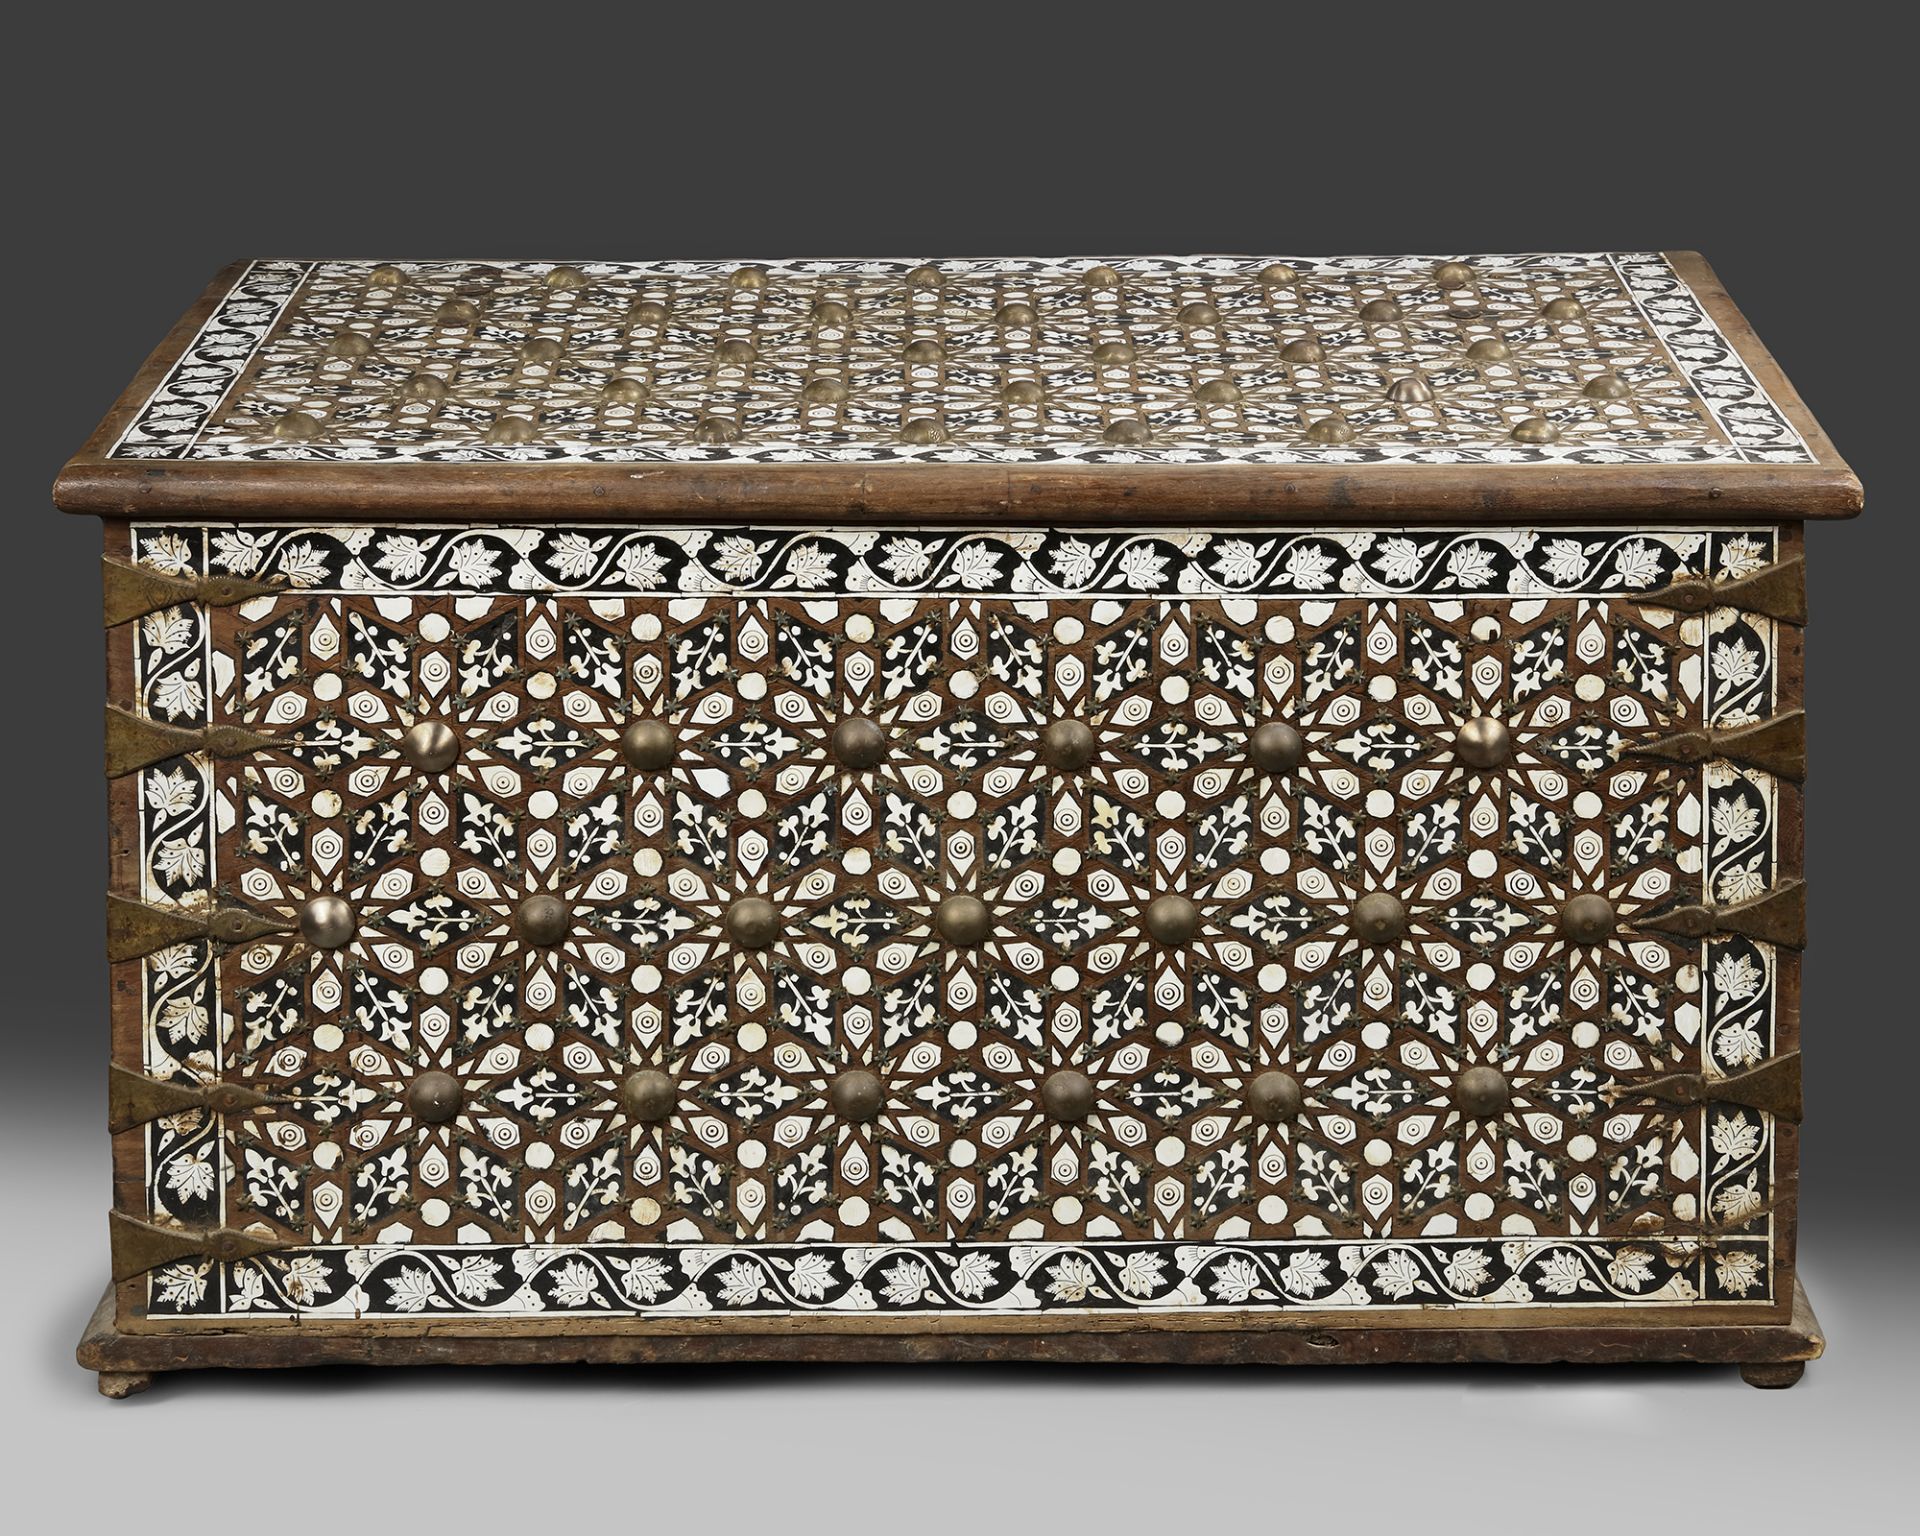 A LARGE OTTOMAN BONE INLAID WOODEN CHEST, SYRIA, LATE 19TH-EARLY 20TH CENTURY - Bild 3 aus 5